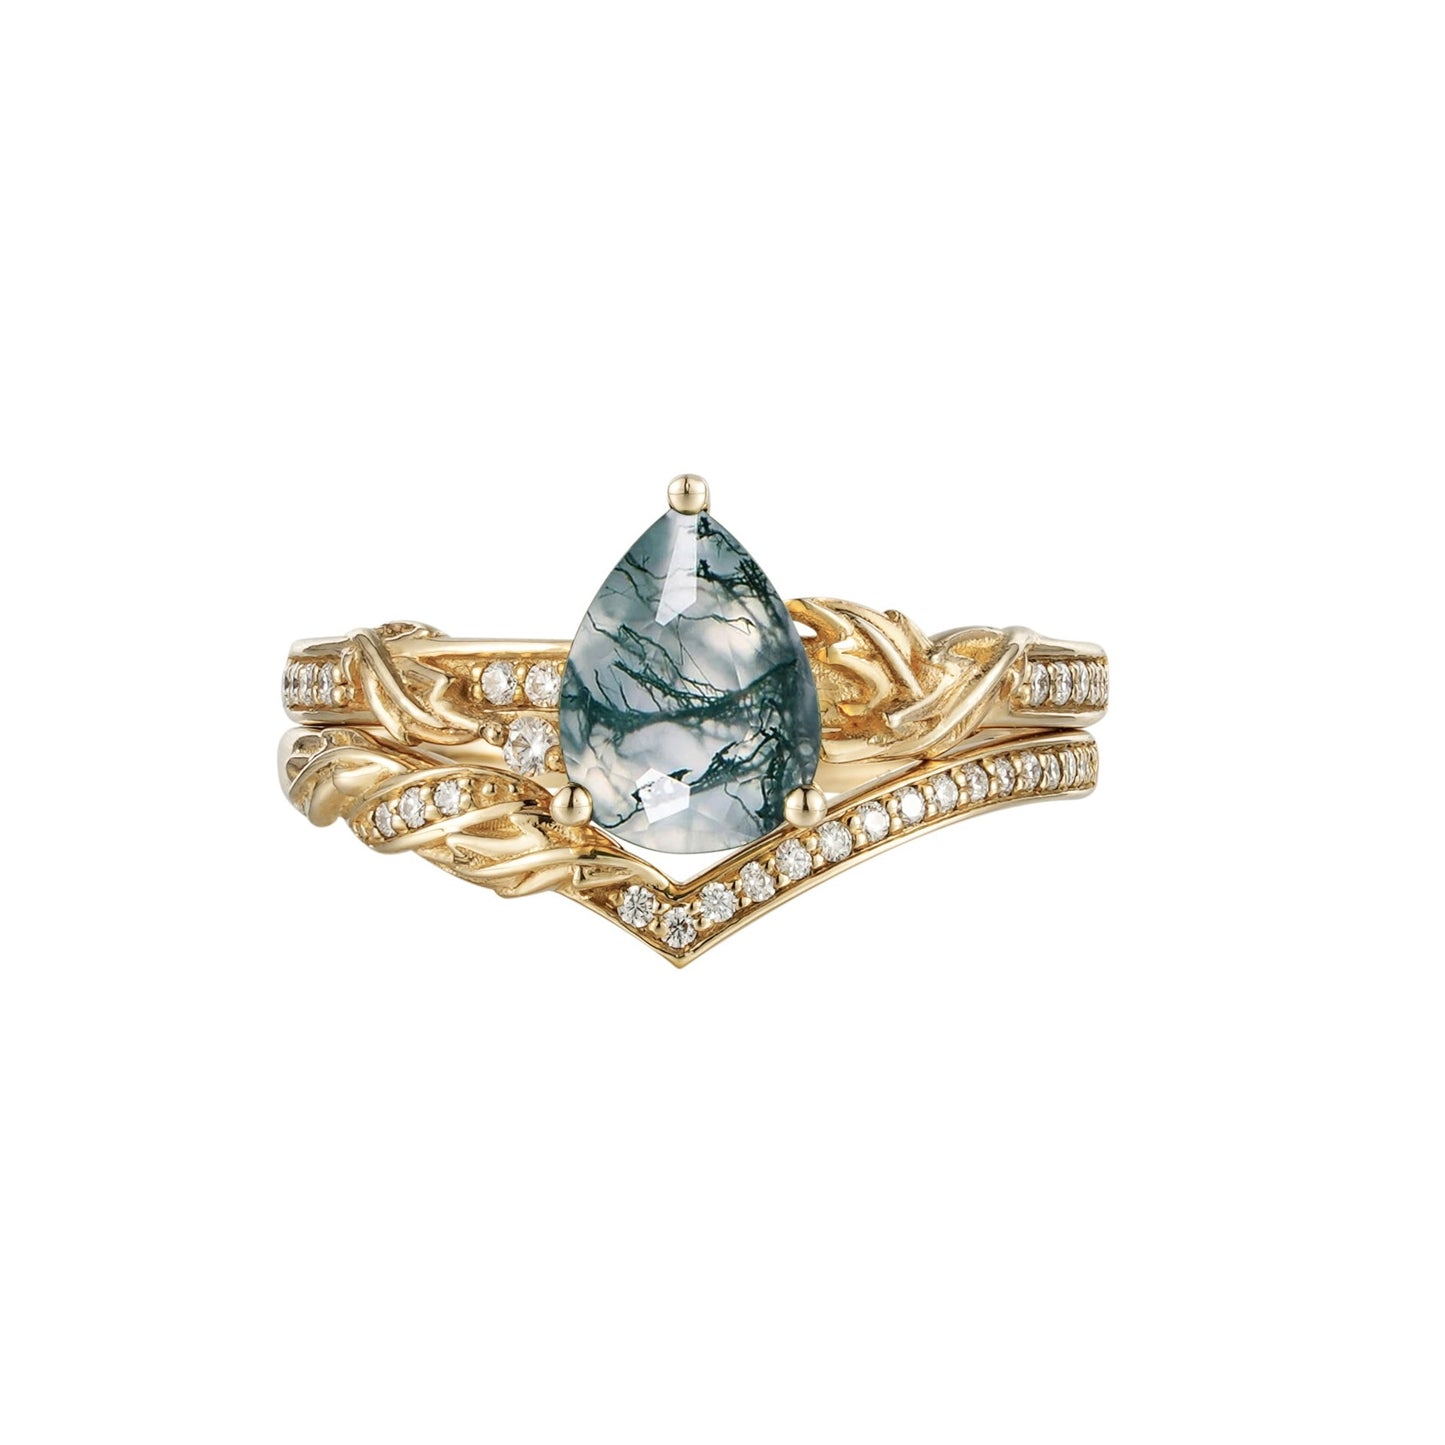 Asymmetric Pear Shape Moss Agate Engagement Ring - Avery2.0